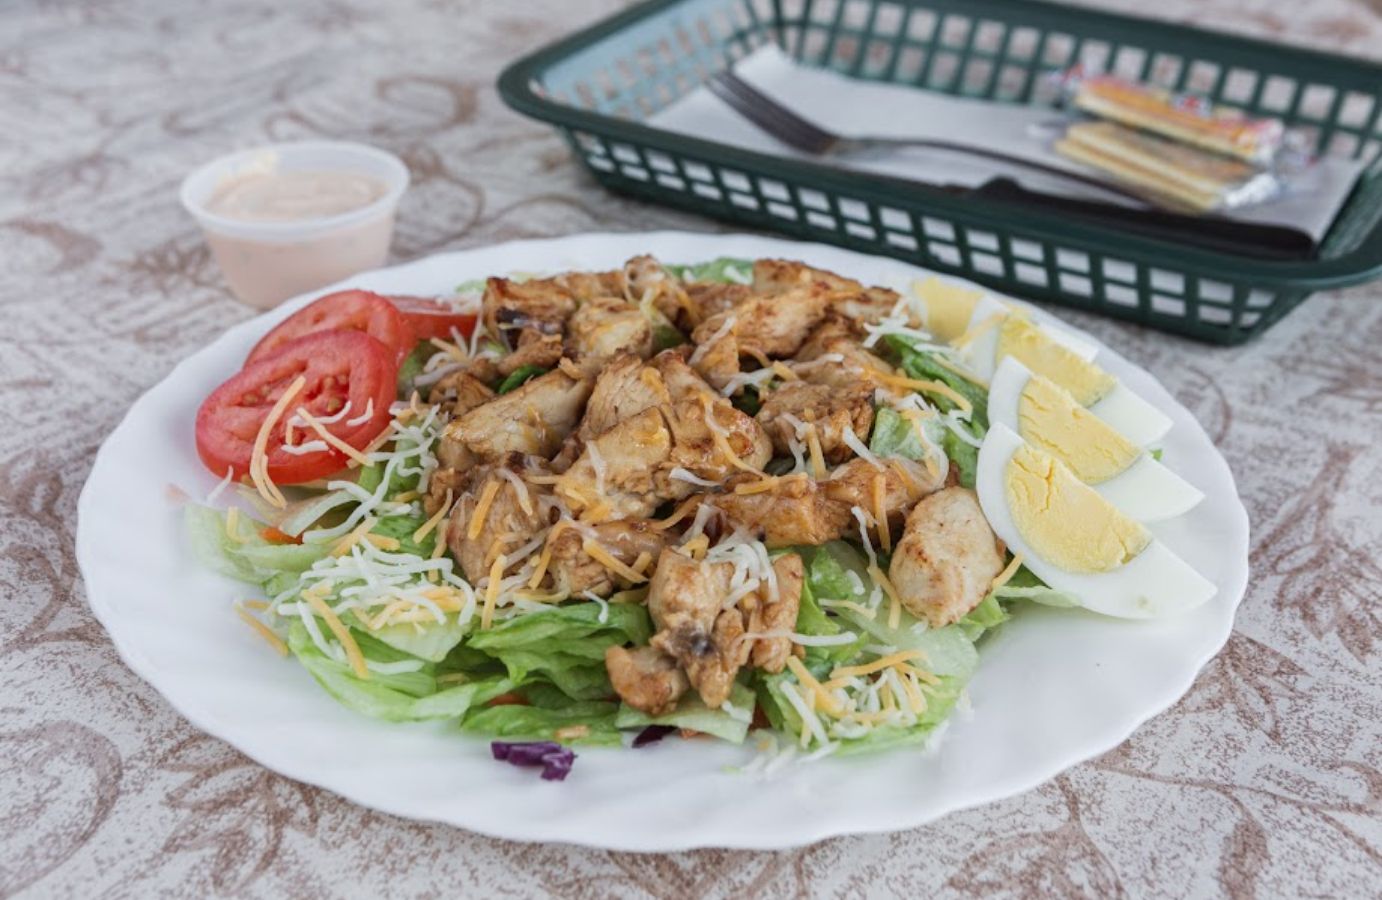 Grilled Chicken Salad on a table side view